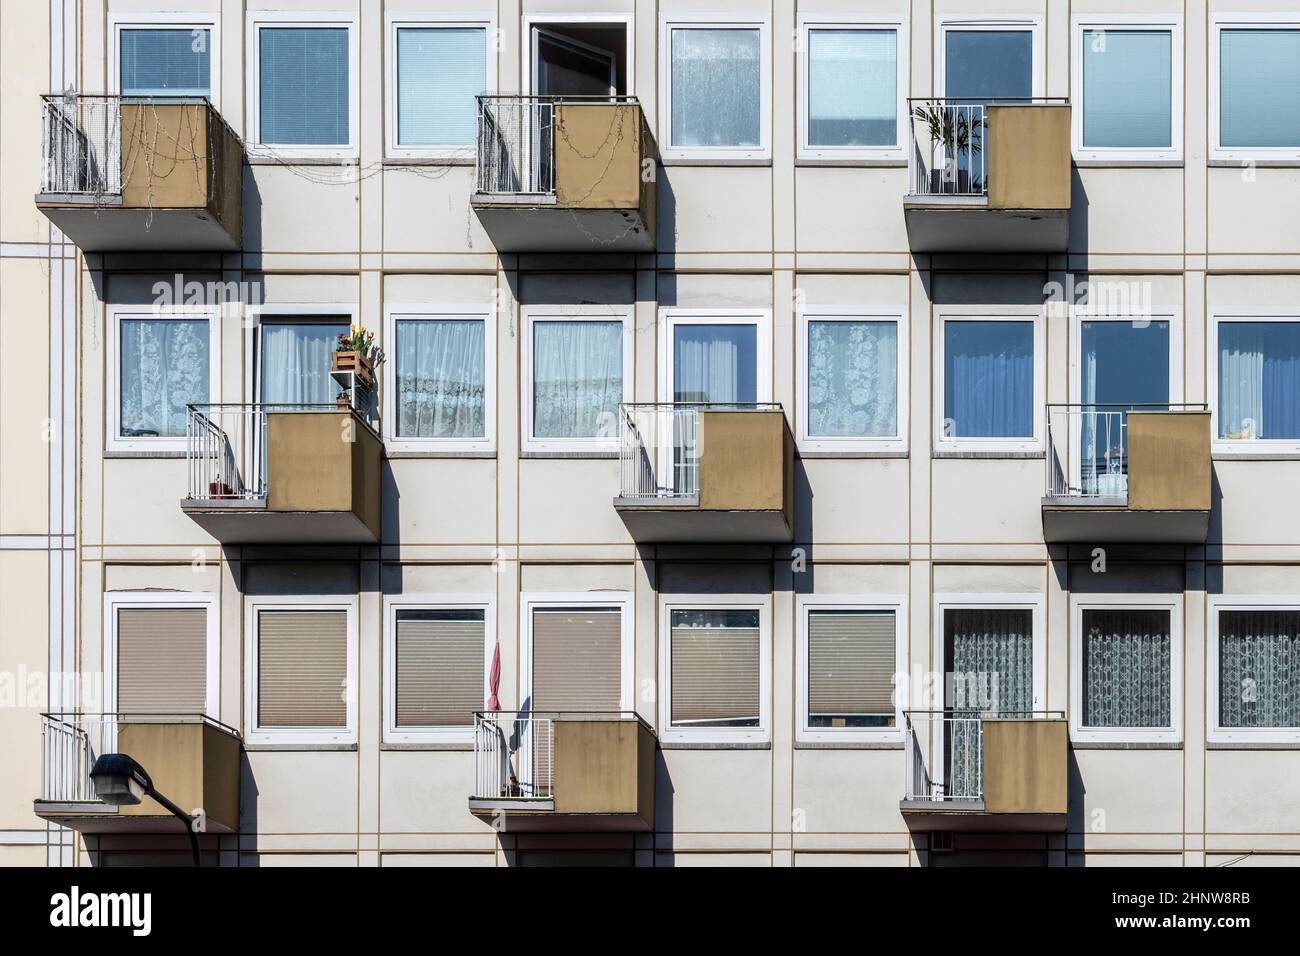 facade of house in typical social housing architecture in Germany Stock Photo